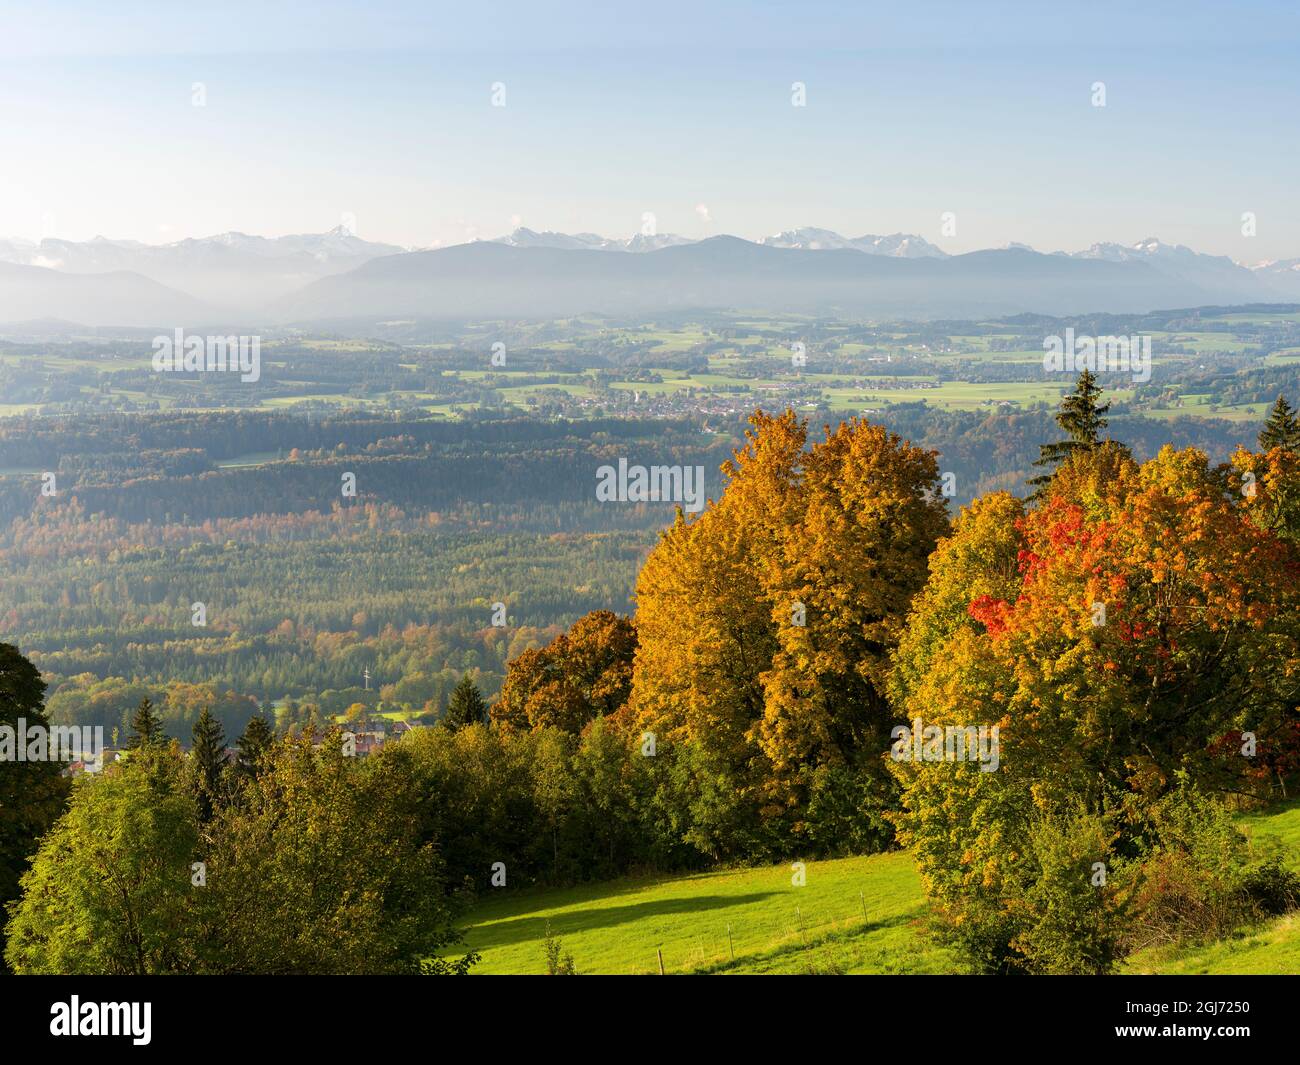 Landscape at Mt. Hoher Peissenberg during sunrise, the view towards the Alps, Wetterstein Mountain Range. Mt. Hoher Peissenberg is located in the foot Stock Photo